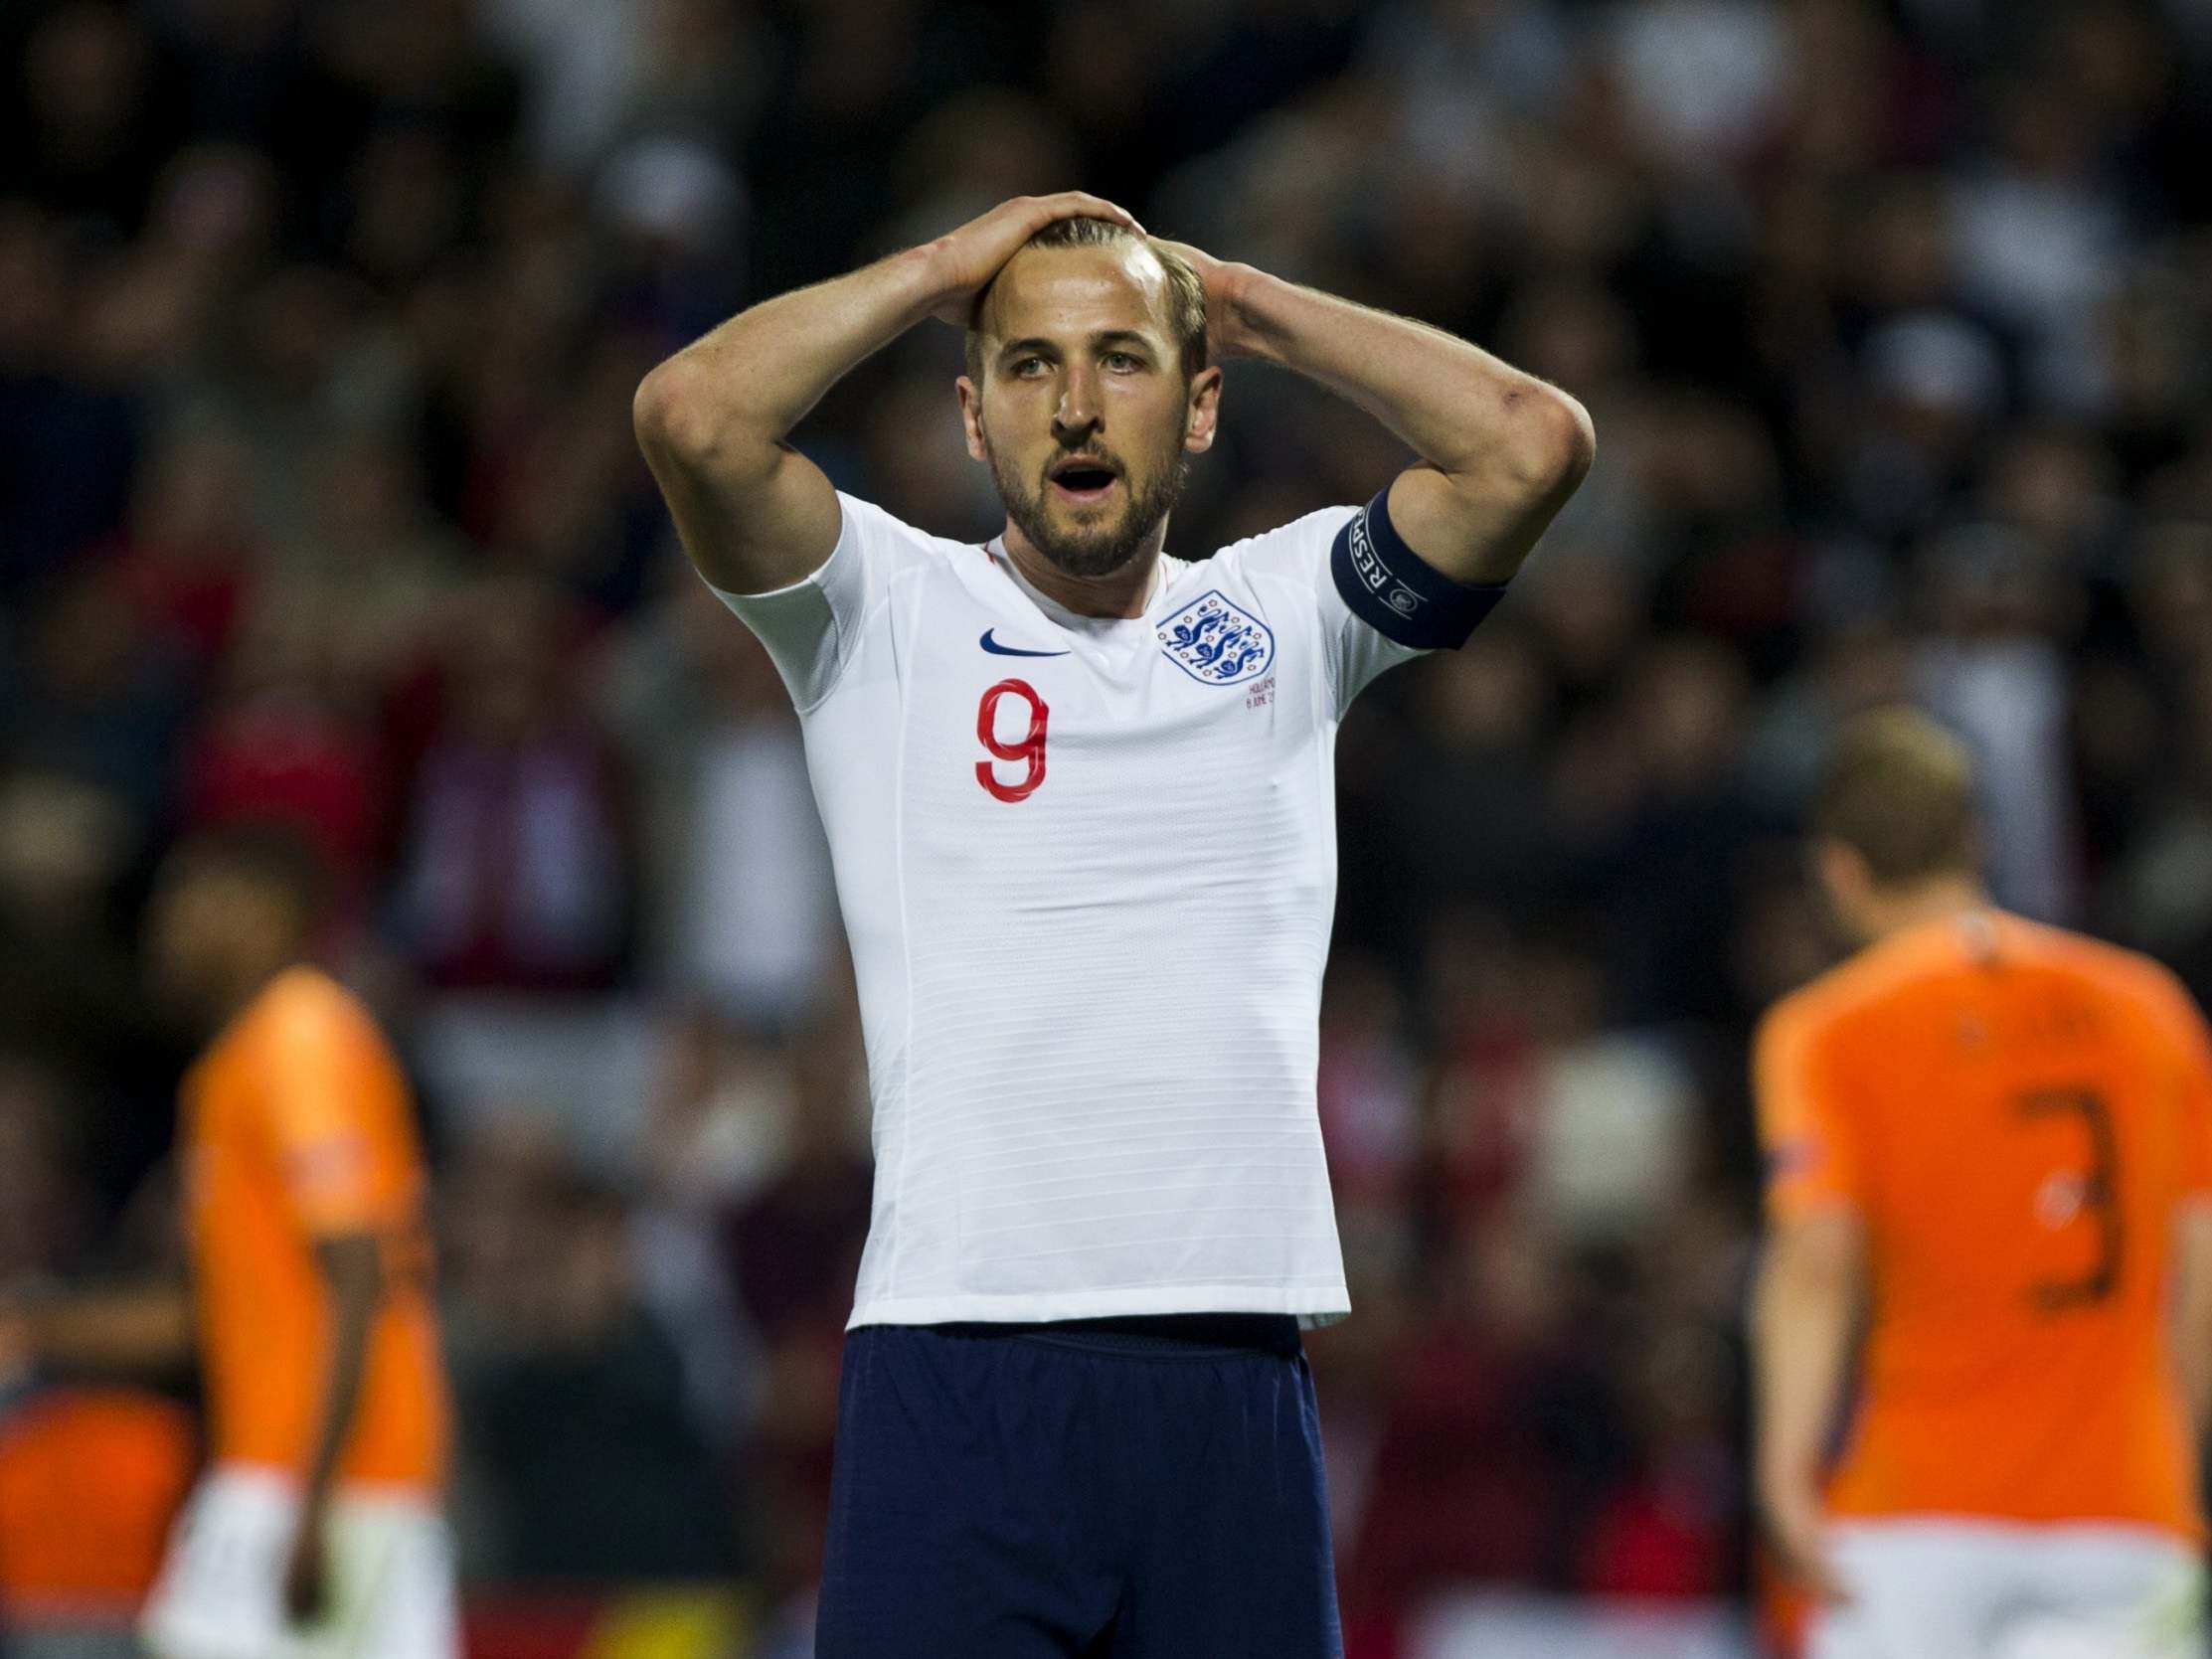 Kane despairs as England suffer defeat to the Netherlands